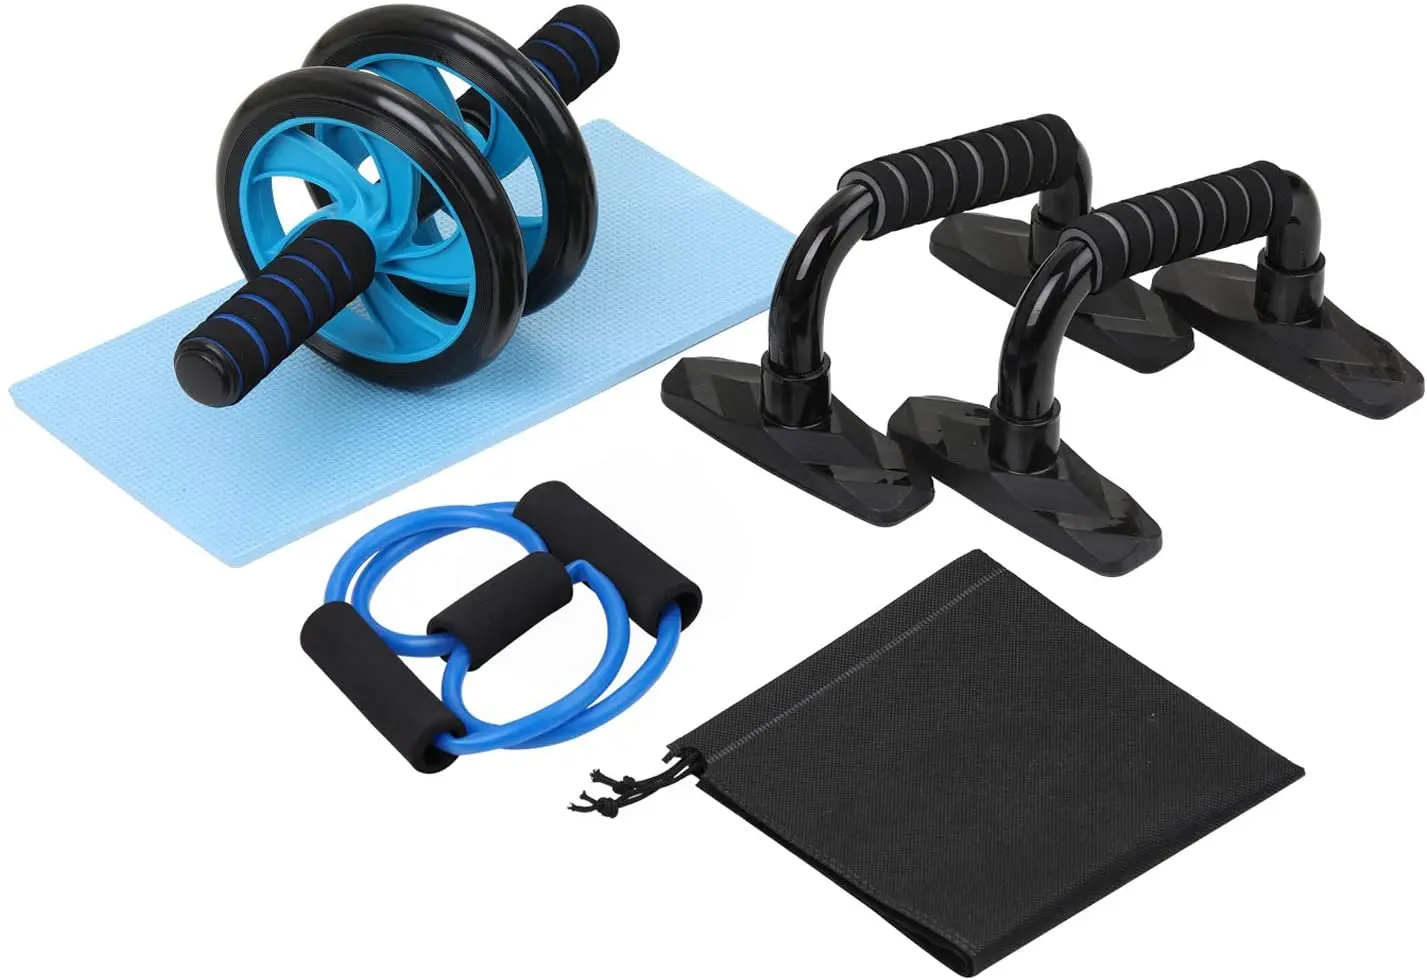 

5-in-1 AB Wheel Roller Exerciser Abdominal Press Wheel Push-UP Bar Knee Pad Portable Equipment Exercise Muscle Strength Fitness